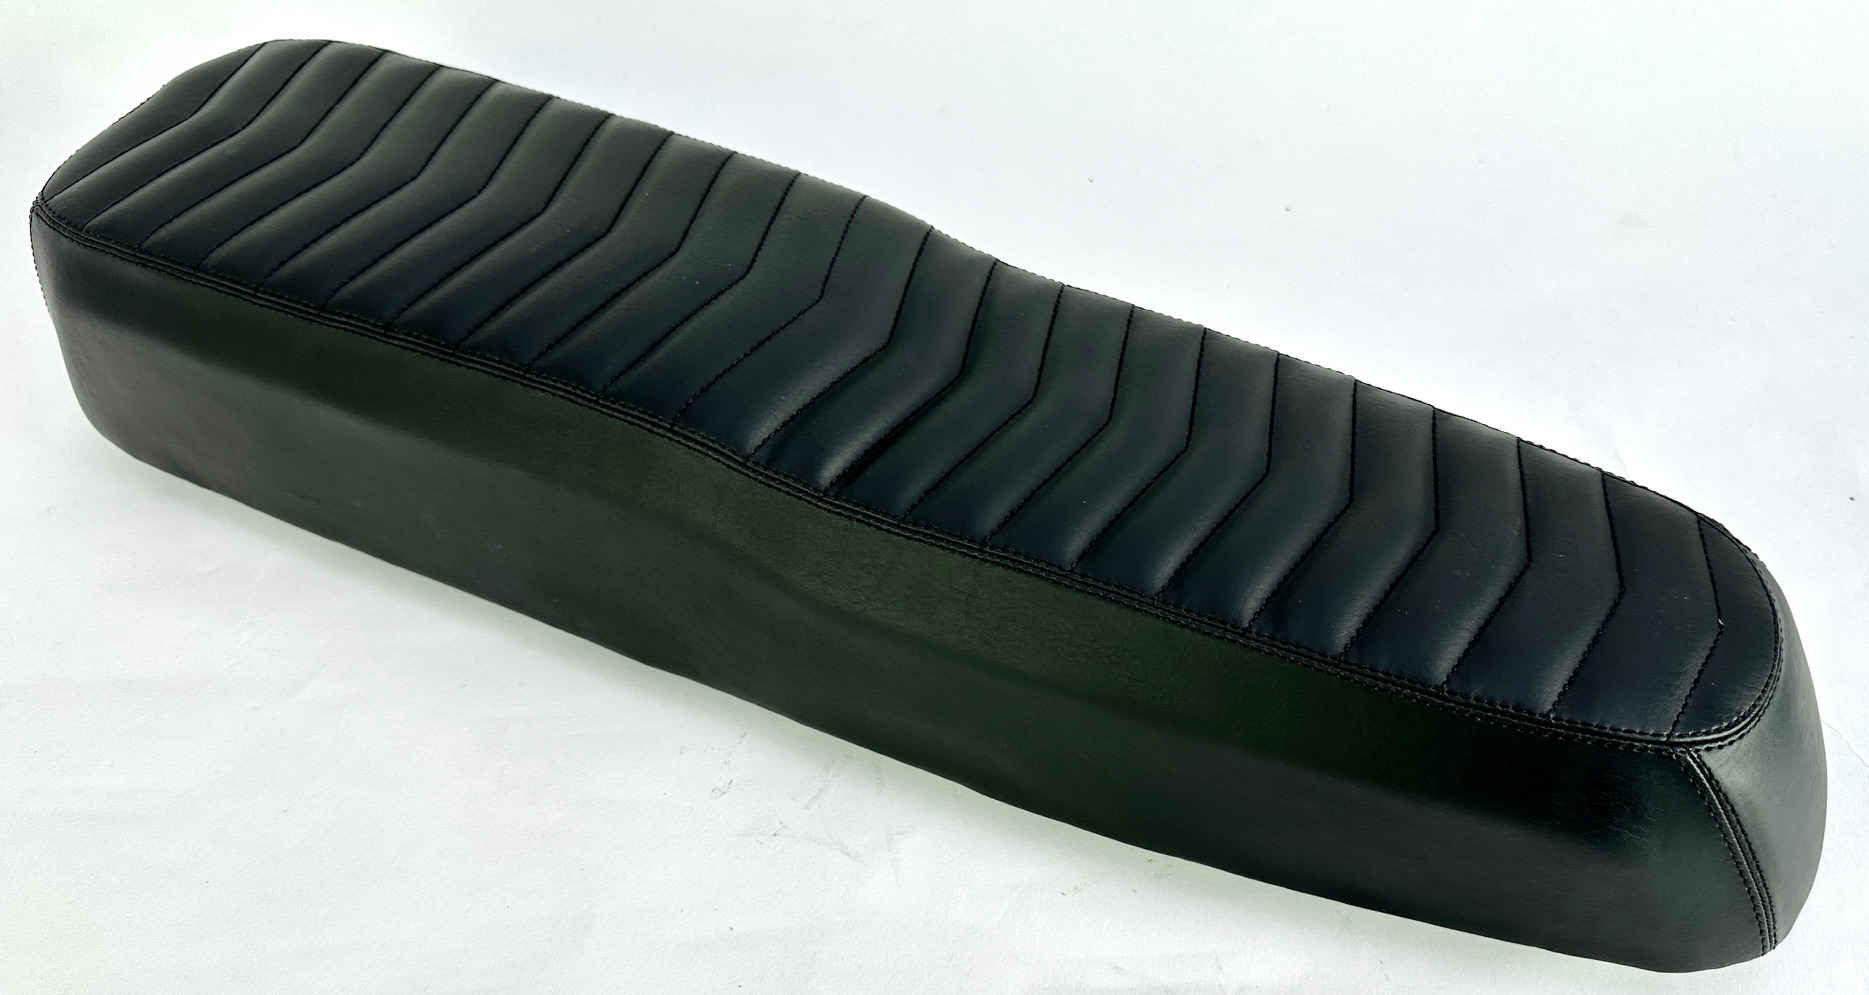 Black bench seat with quilted seams